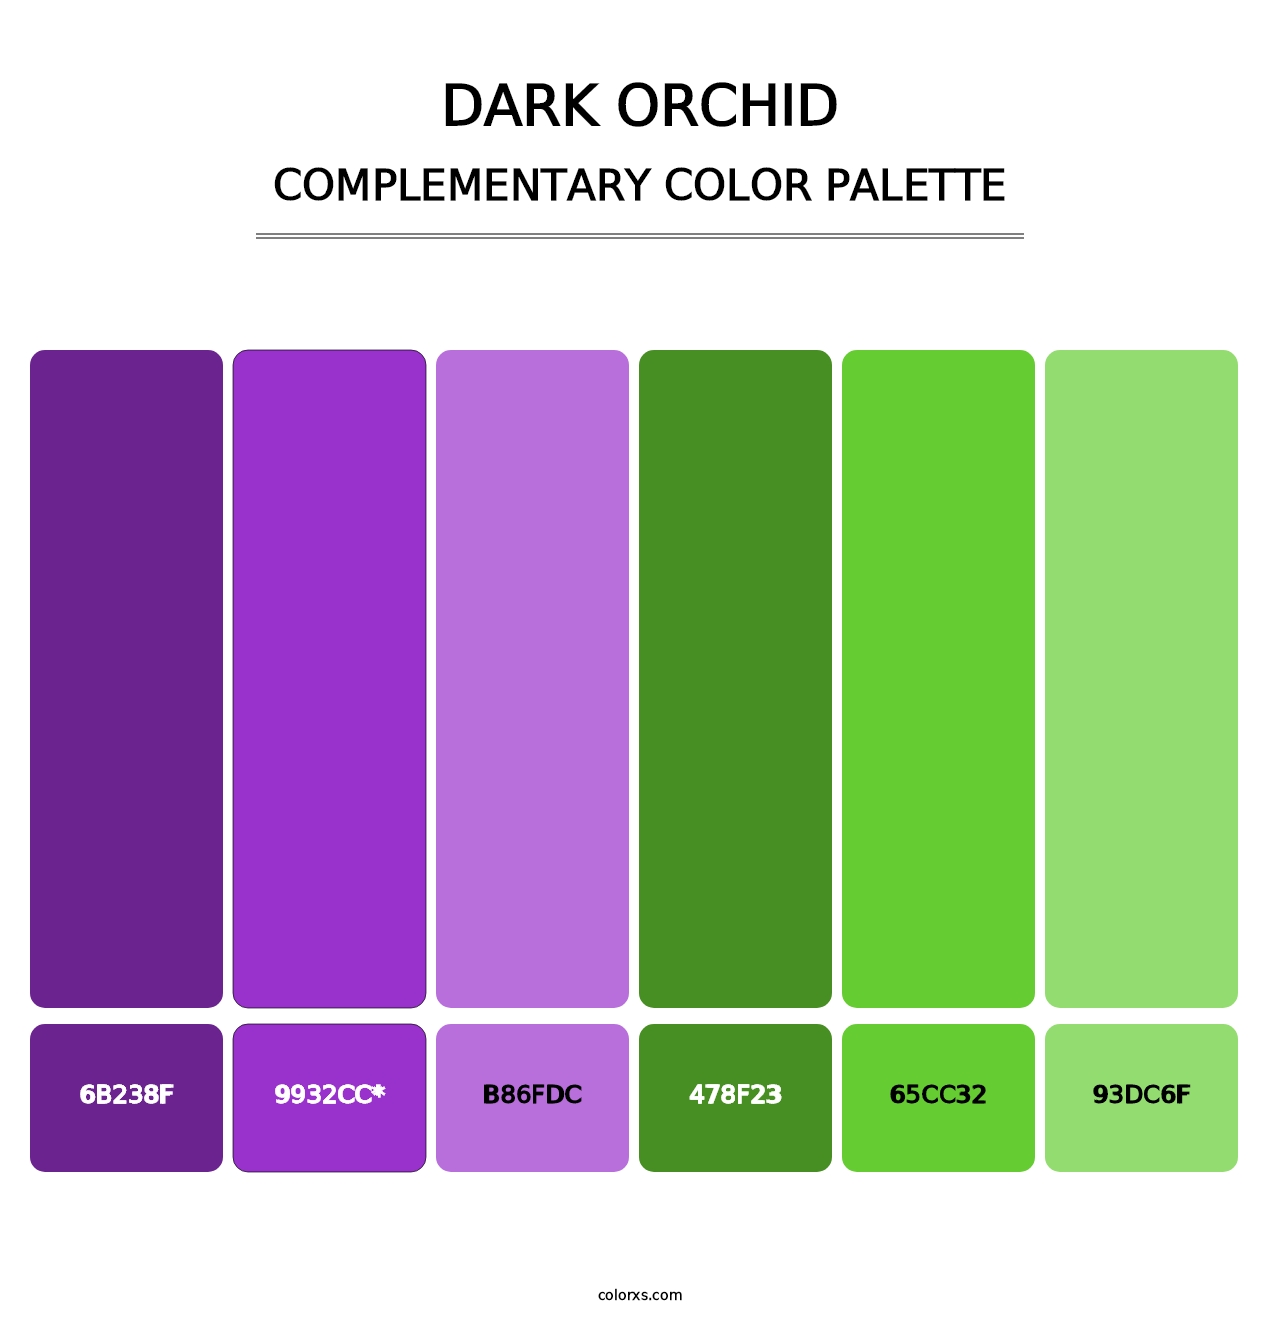 Dark Orchid - Complementary Color Palette